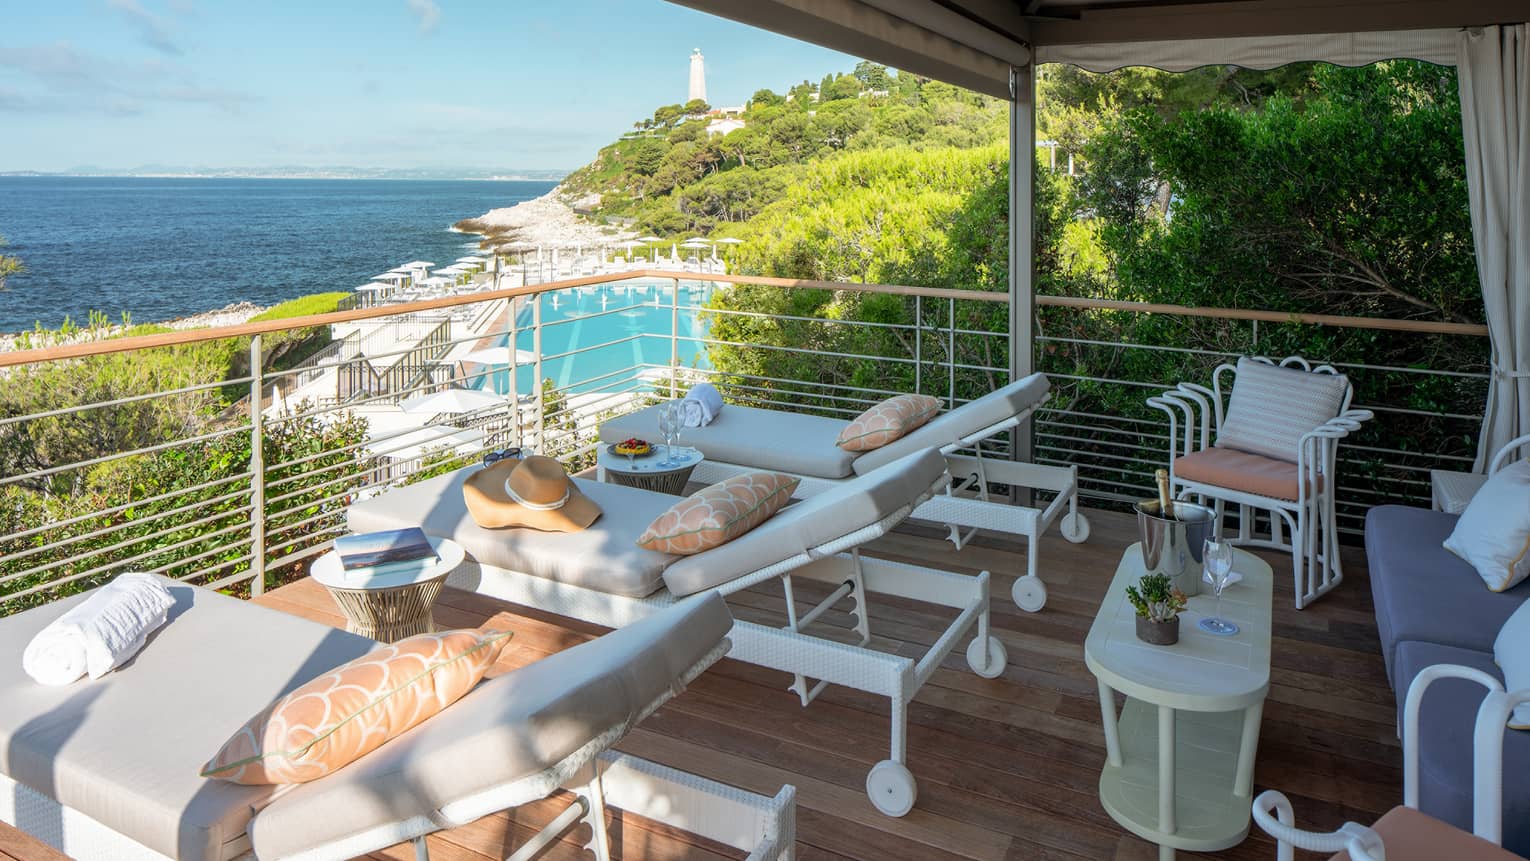 Club Dauphin private cabana terrace with lounge chairs, peach pillows, overlooking pool, Mediterranean